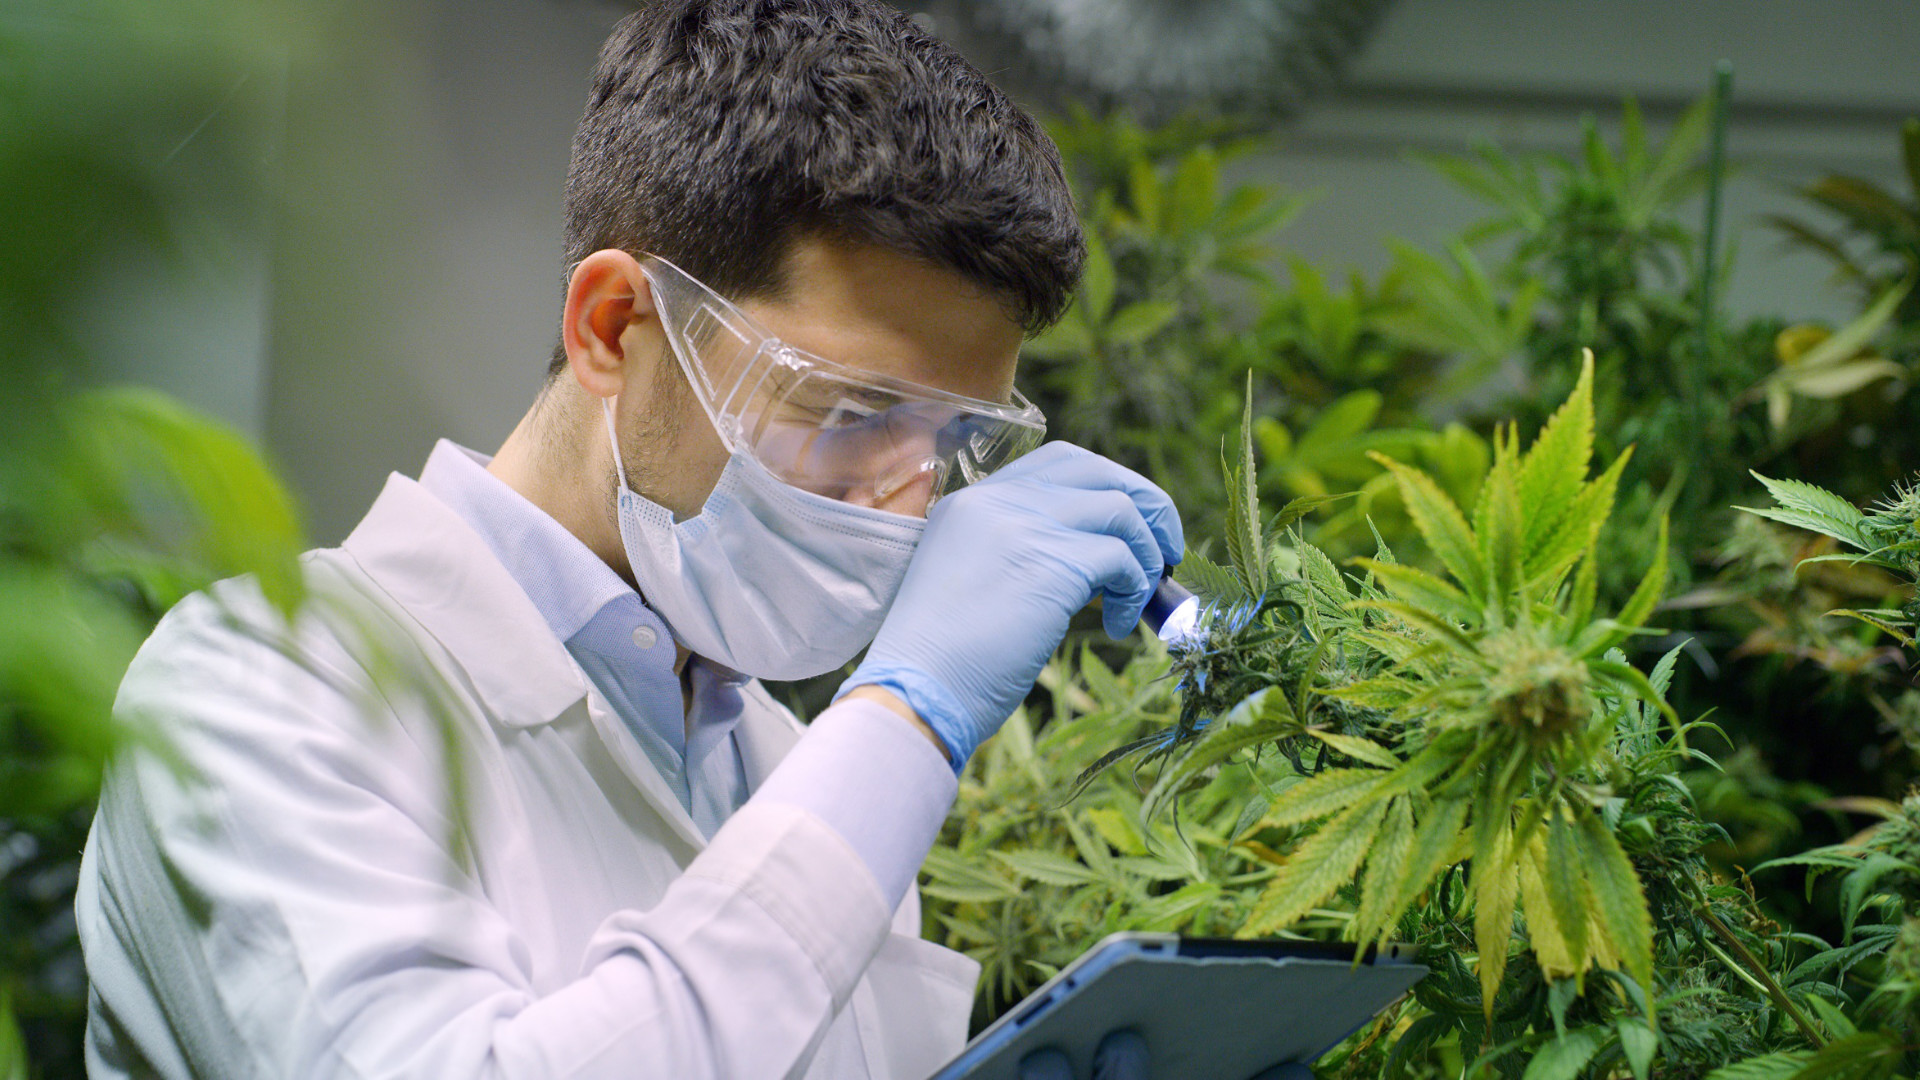 Visual inspection in the greenhouse and chemical analysis in the laboratory ensure the quality of medical cannabis. - Photo: Shutterstock